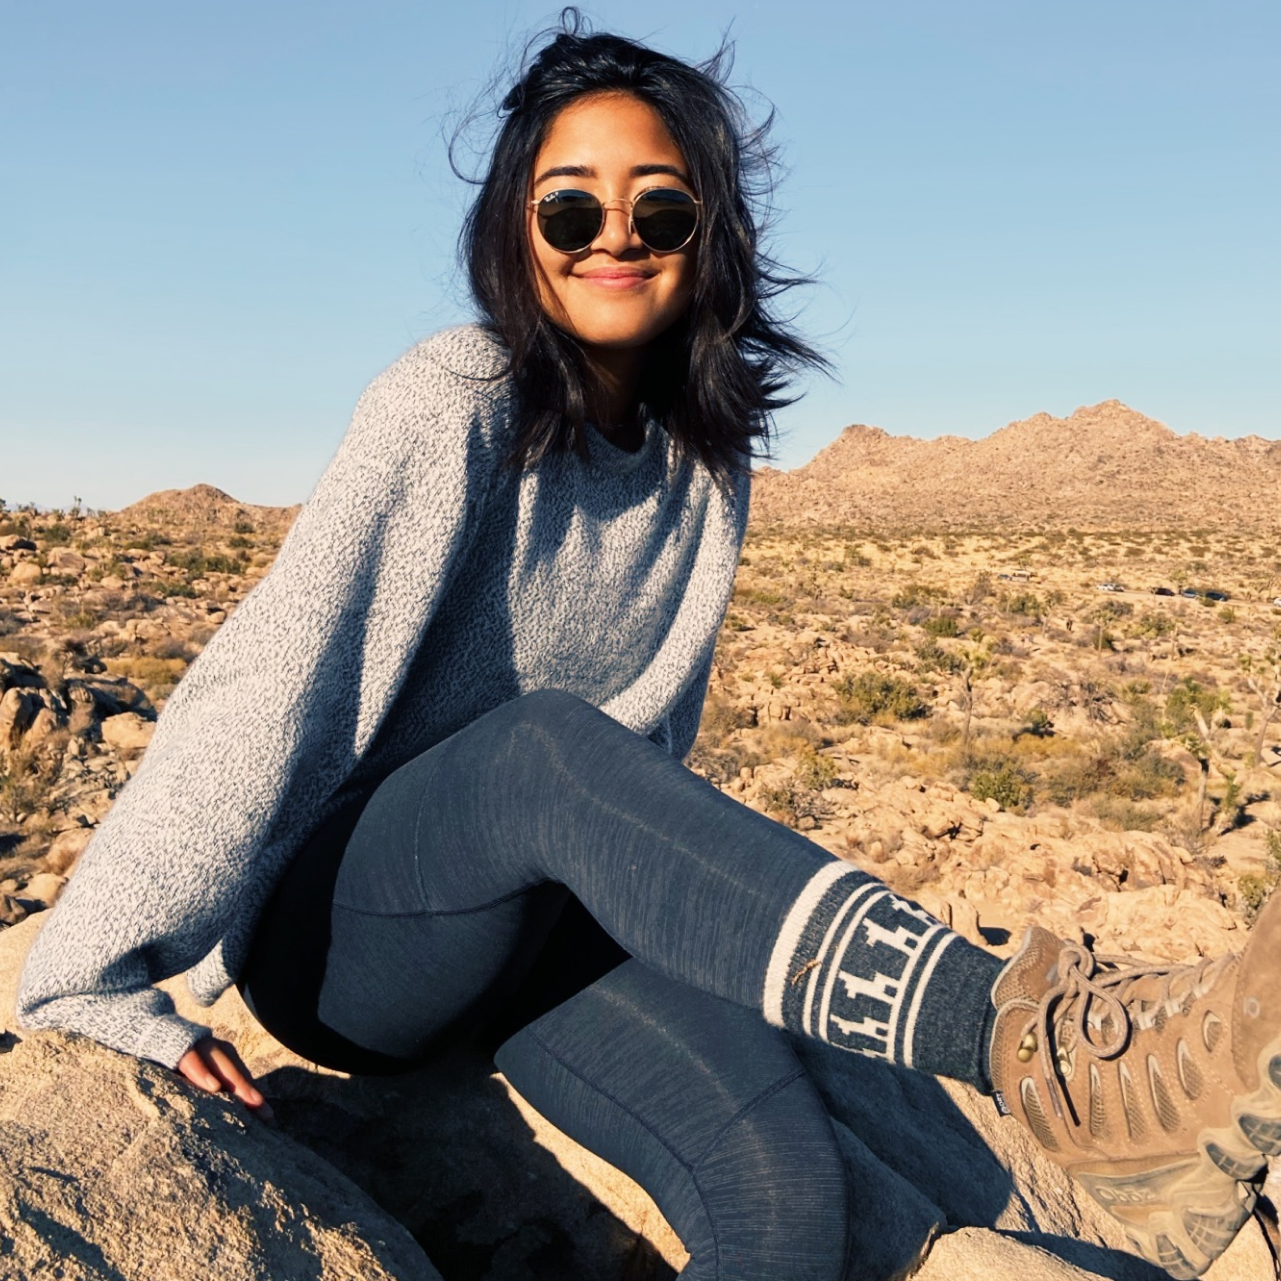 A smiling woman in a desert wearing his amazing Costa socks